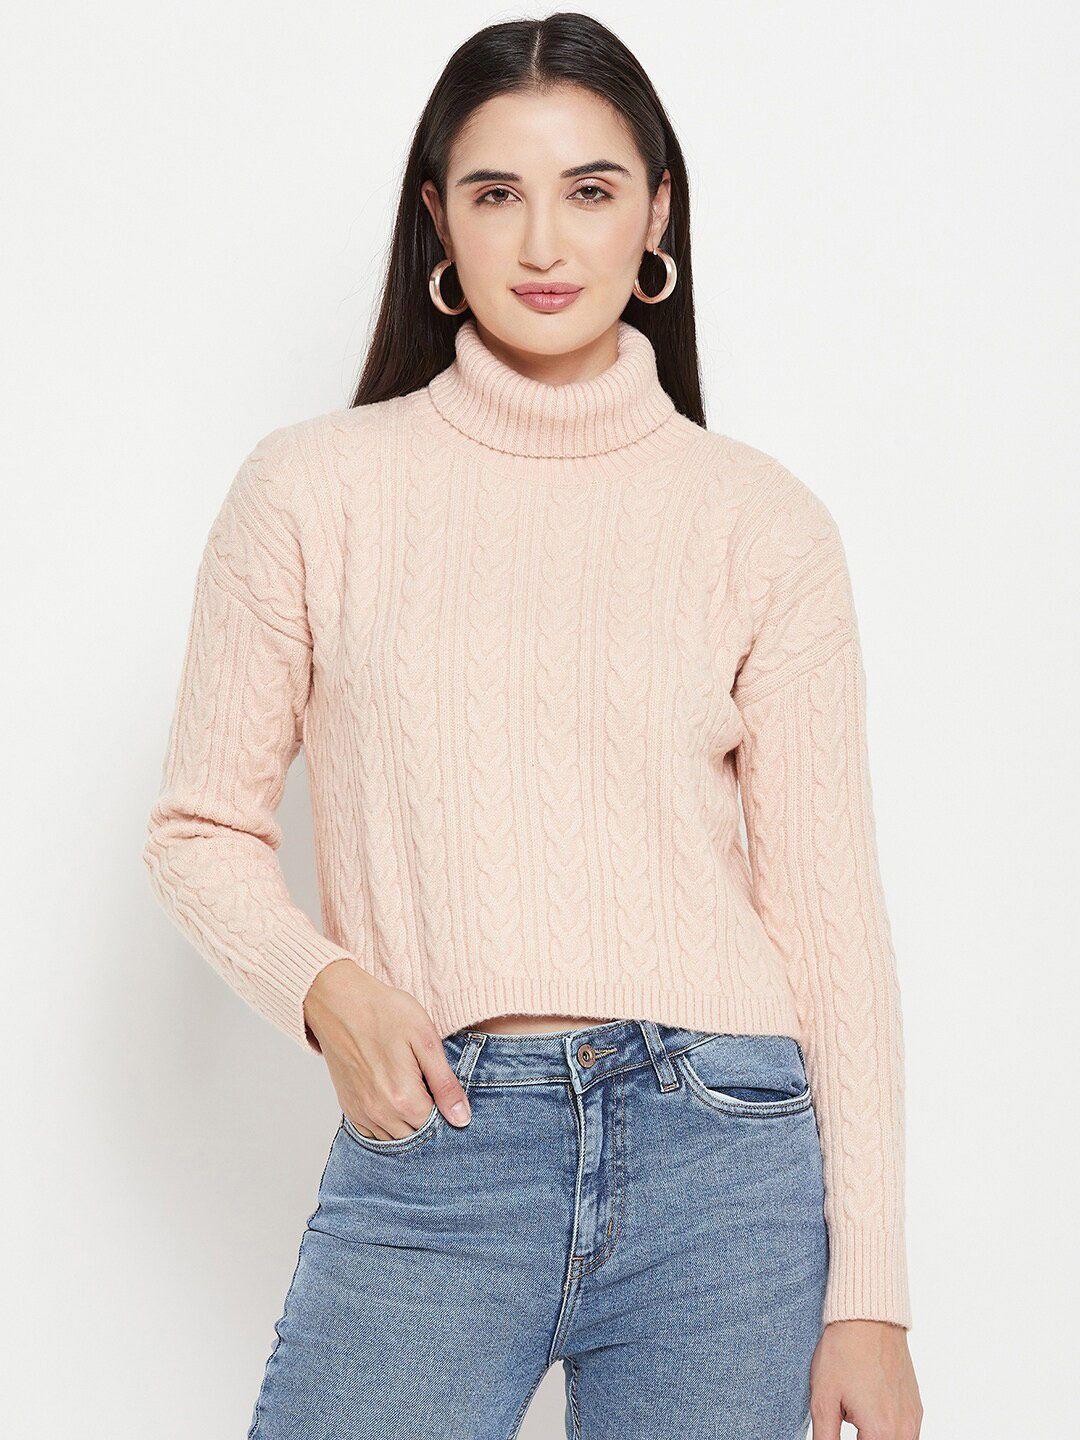 camla-cable-knitted-turtle-neck-crop-pullover-sweater